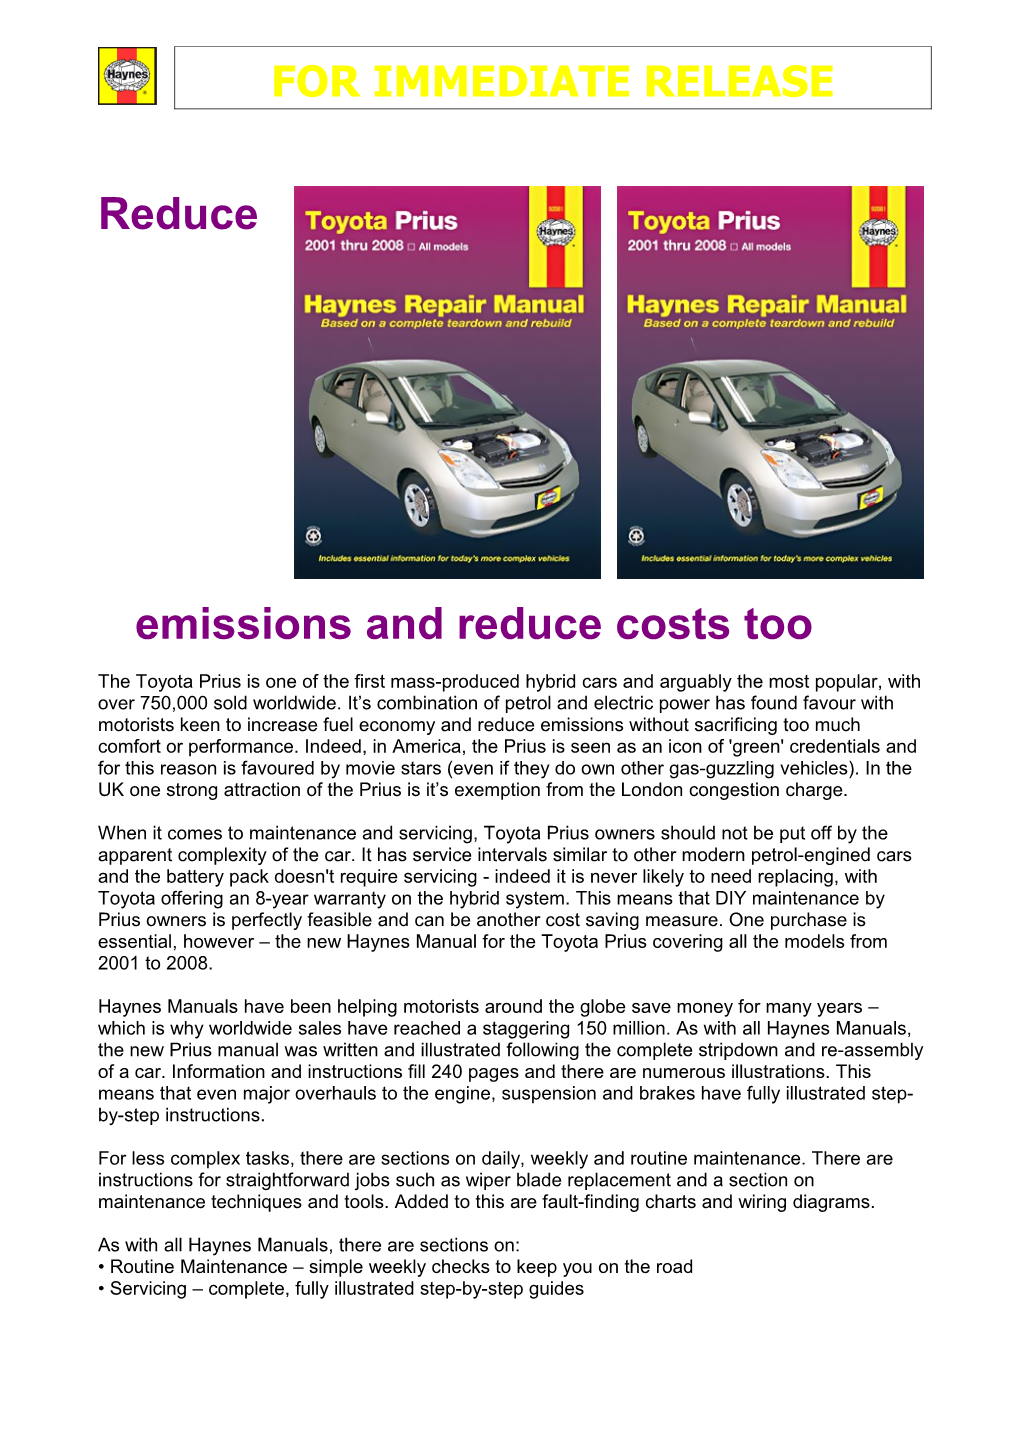 Reduce Emissions and Reduce Costs Too